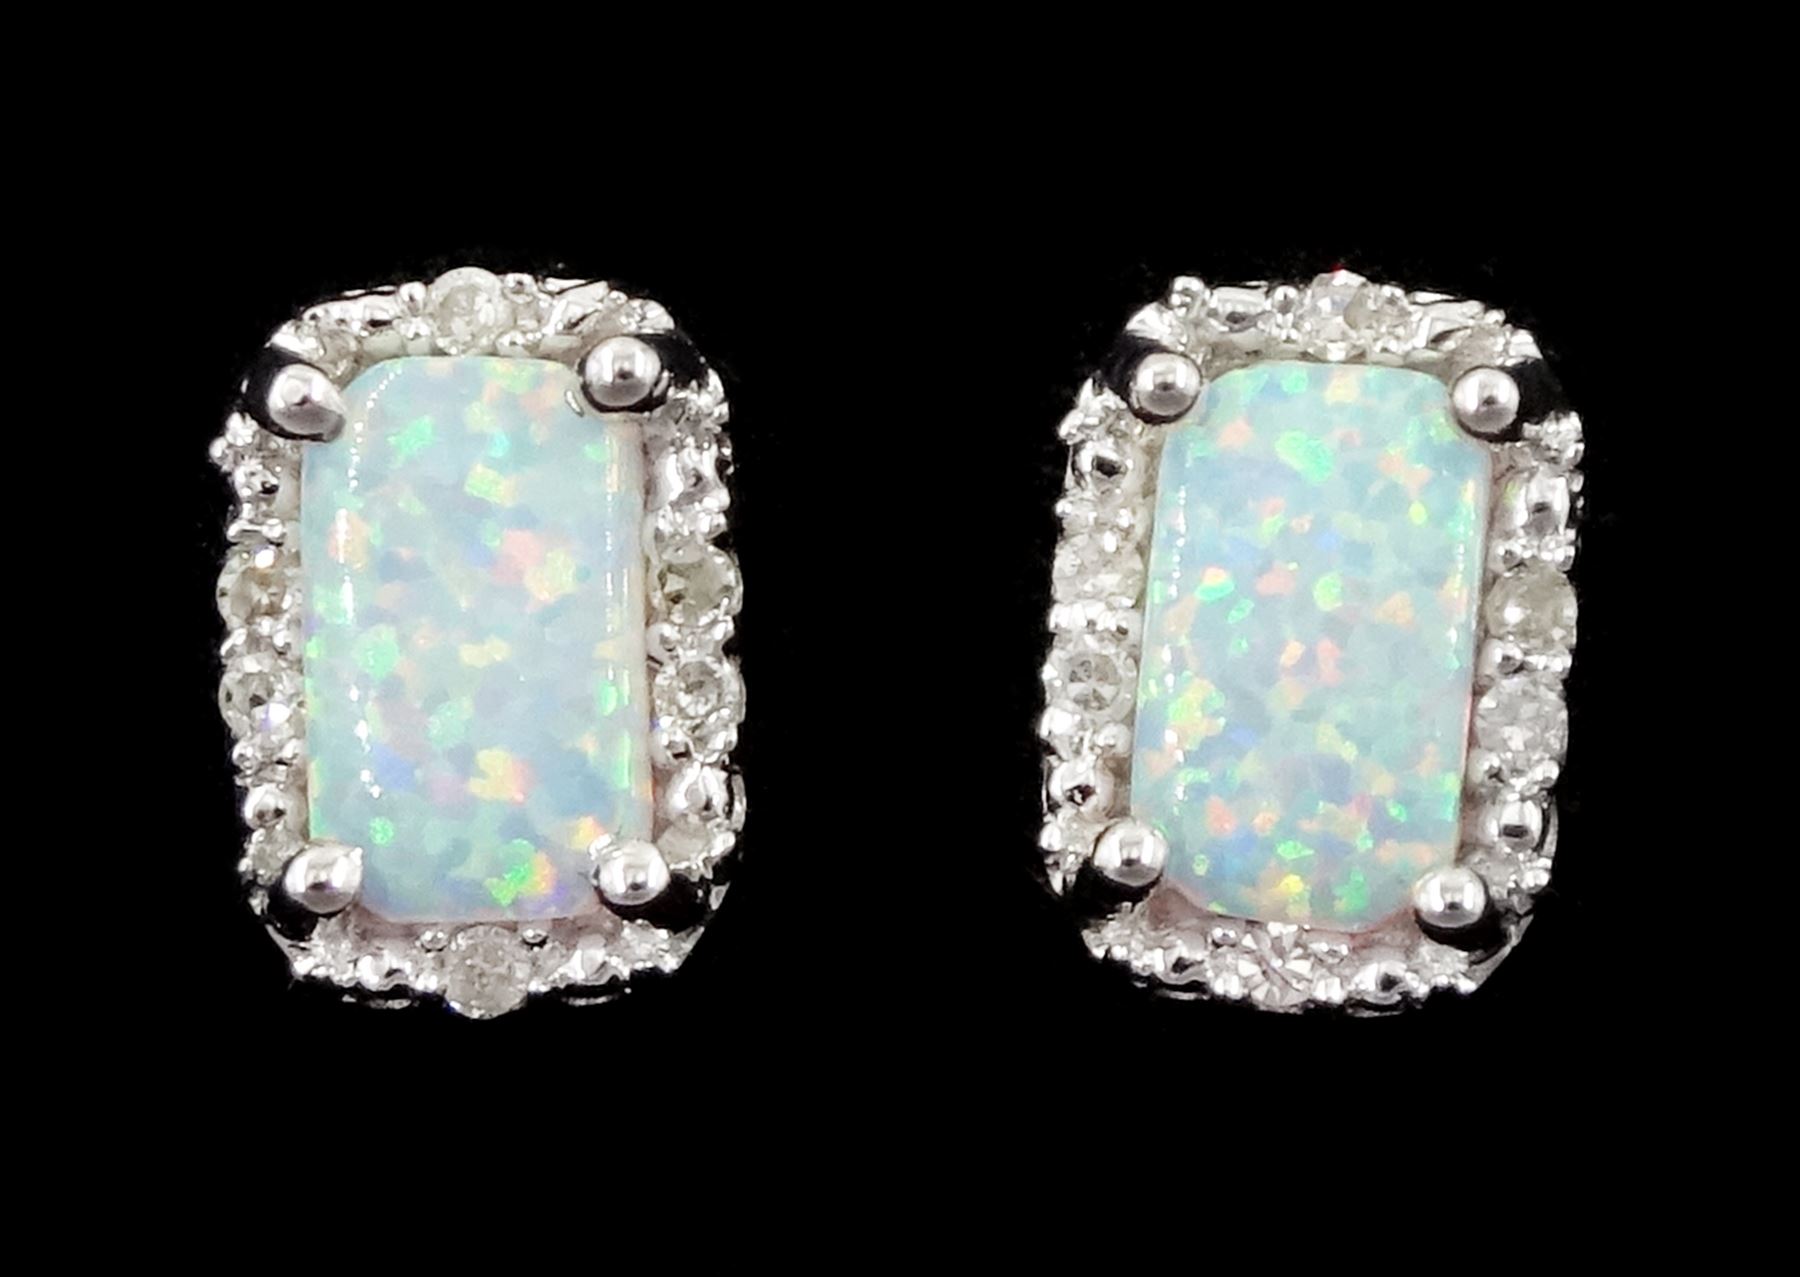 Pair of 9ct white gold opal and diamond stud earrings